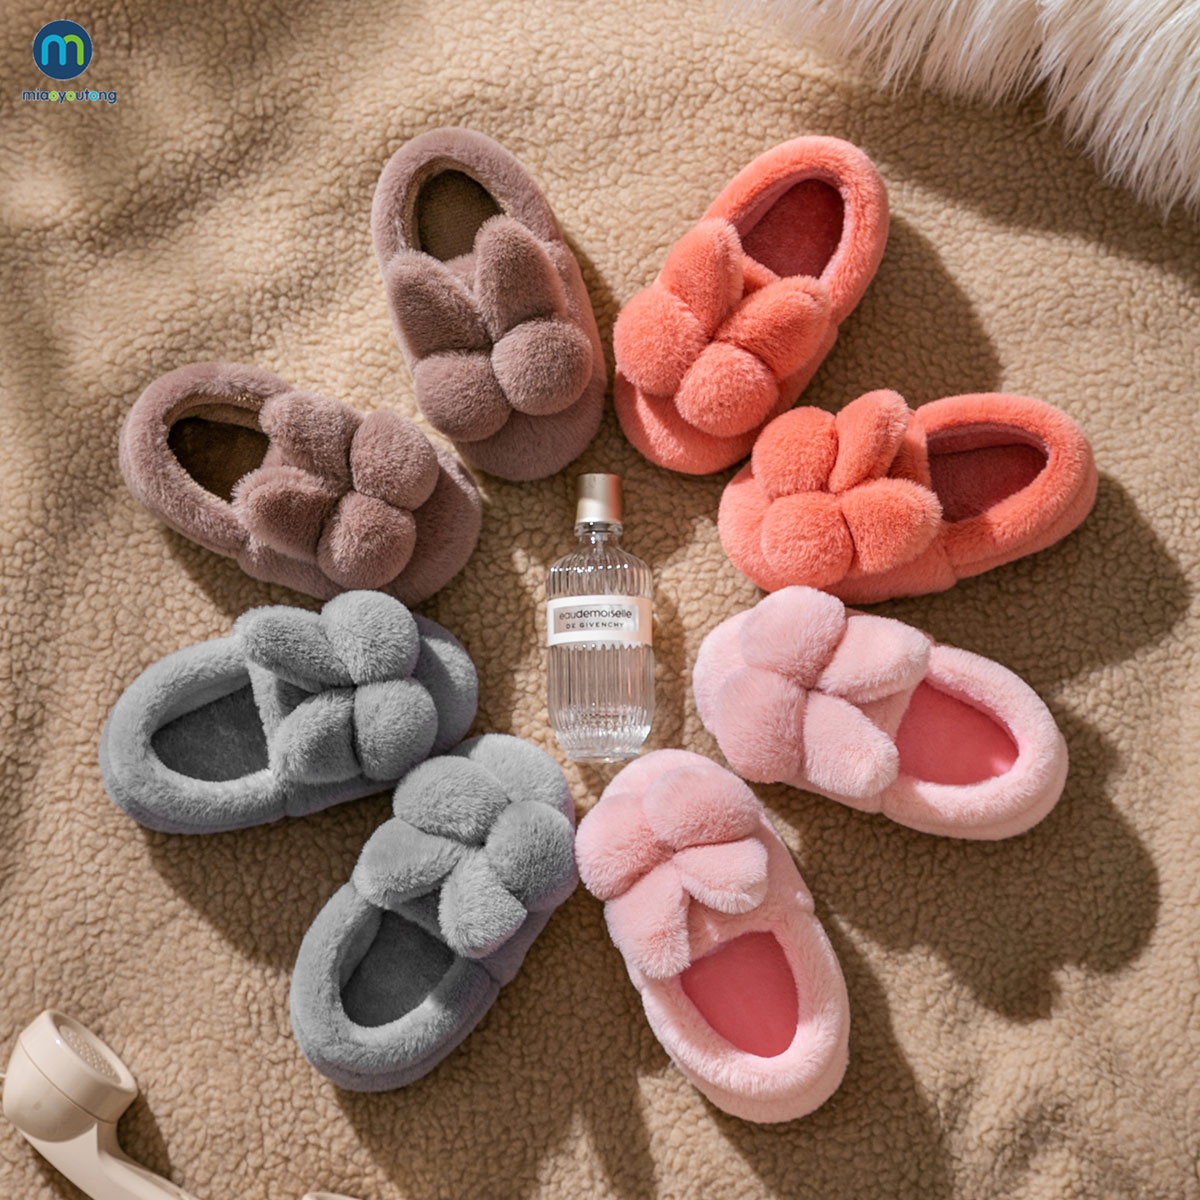 

Slipper Children Indoor Slippers For Home Soft Slippers Girls Winter Warm Fluffy Kids Shoes Mum Dad Floor Baby Slippers Boys Miaoyoutong 230509, D52-ka